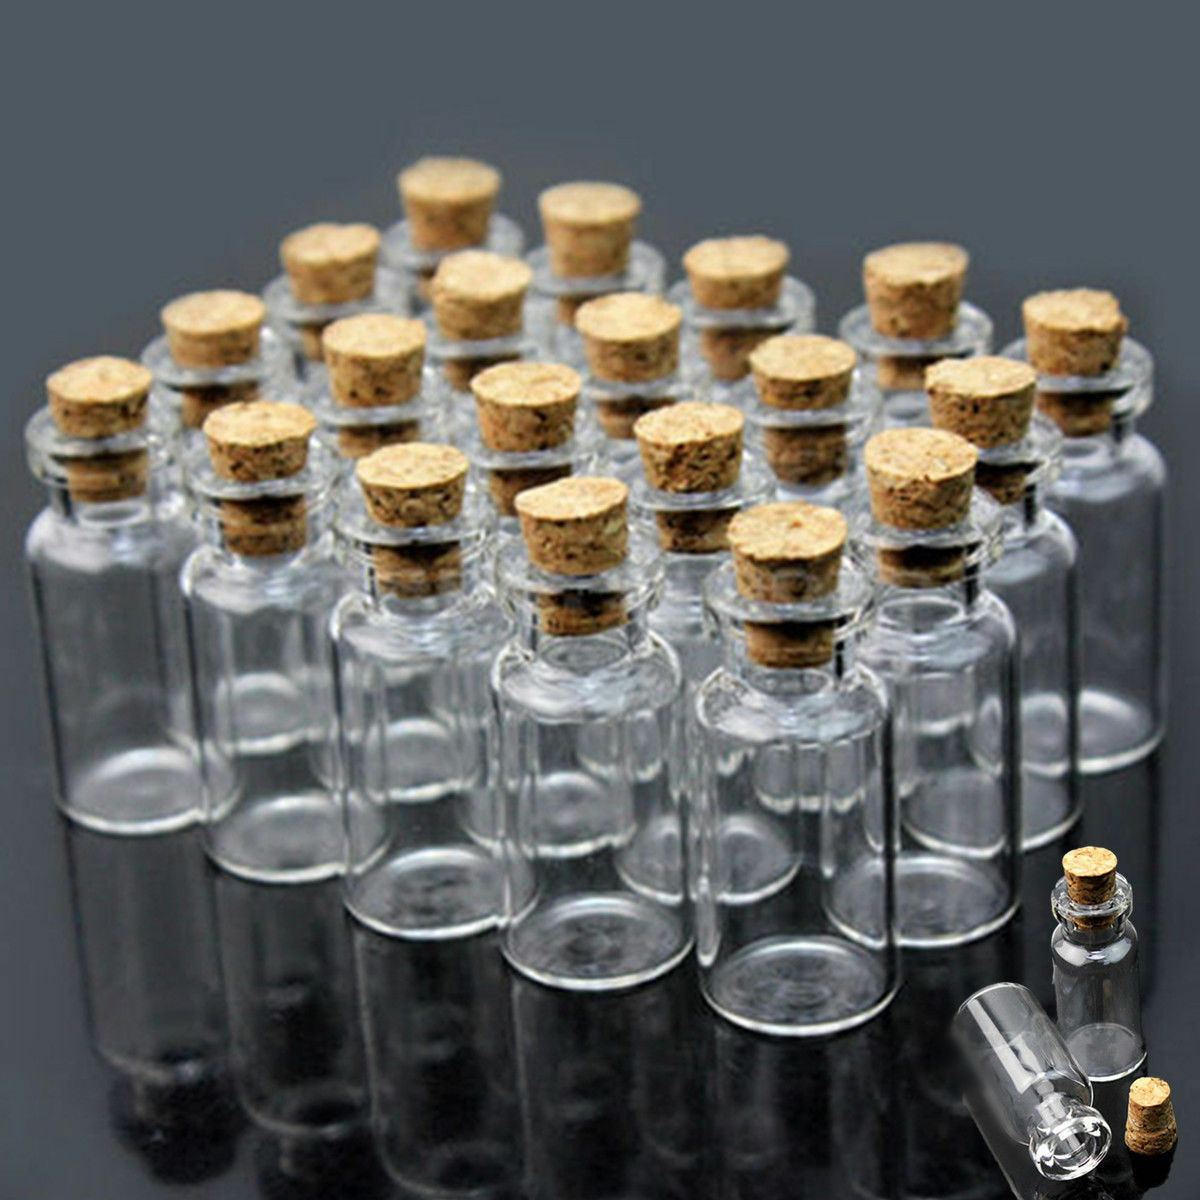 0.5/1/2/5ML Mini Small Cork Stopper Glass Vial Jars Containers Bottle Wholesale